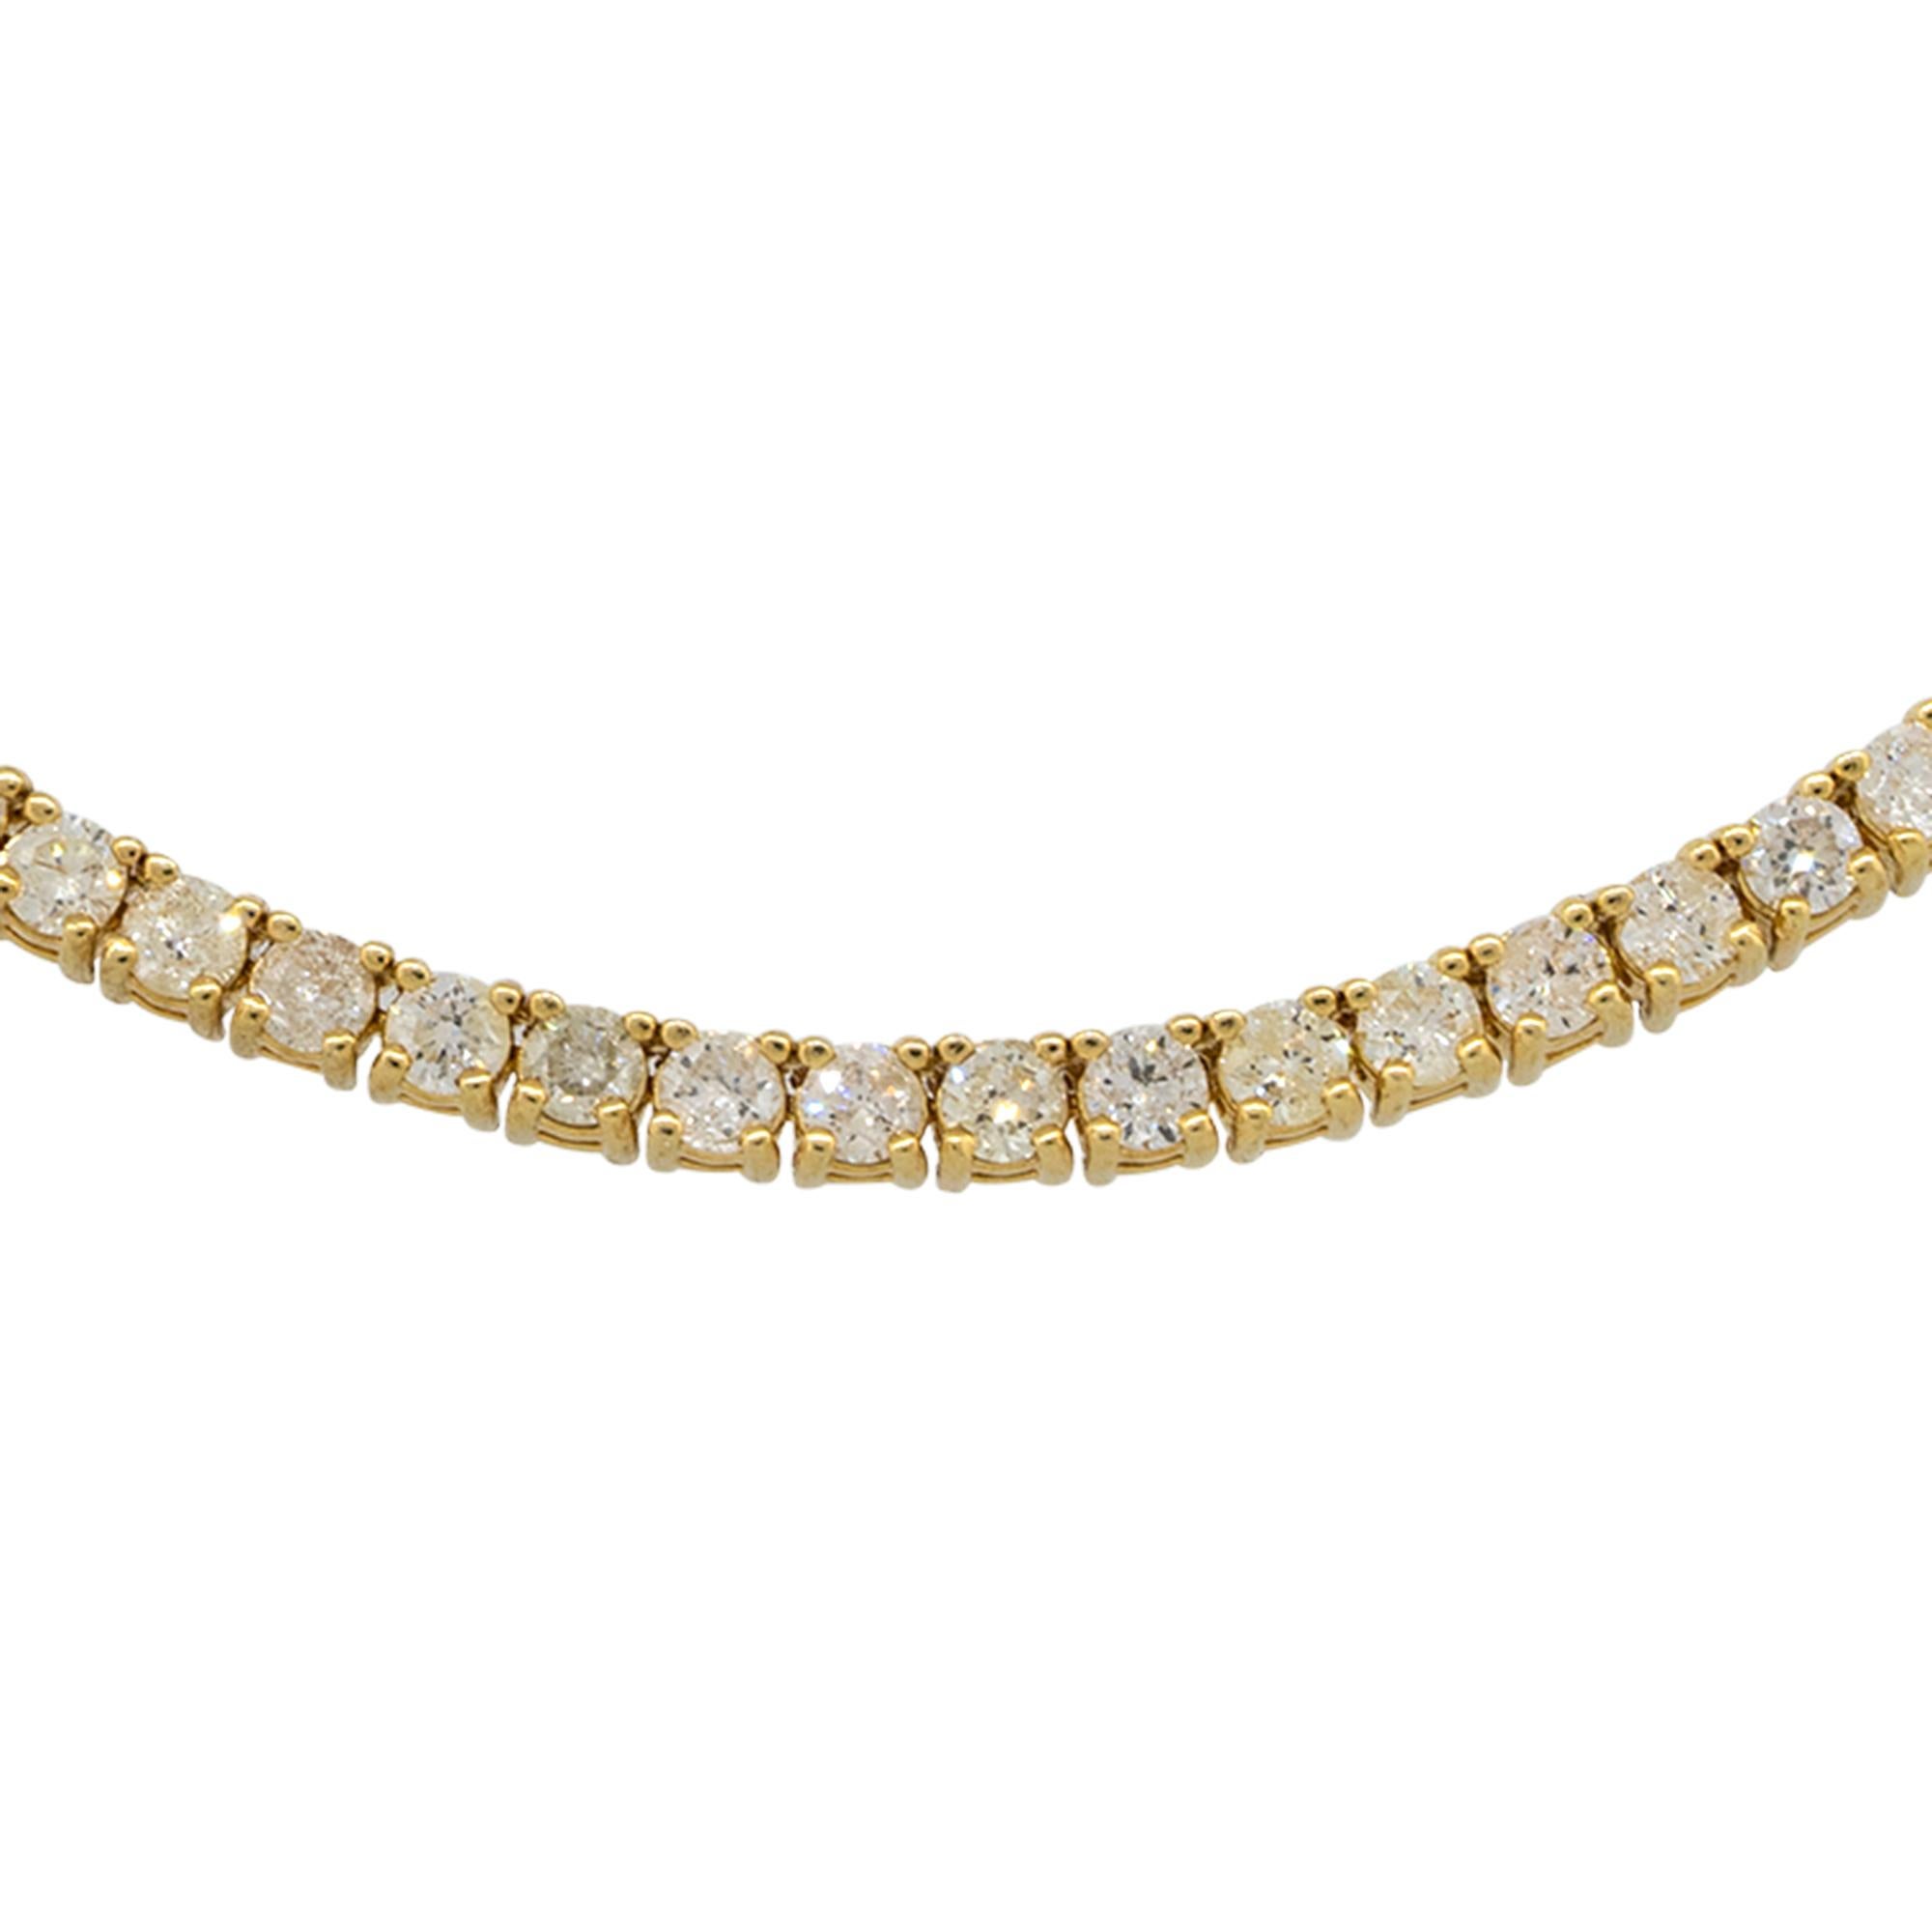 Material: 14k Yellow Gold
Diamond Details: Approx. 9.02ctw of round cut Diamonds. Diamonds are G/H in color and VS in clarity. 
Measurements: Necklace measures 20